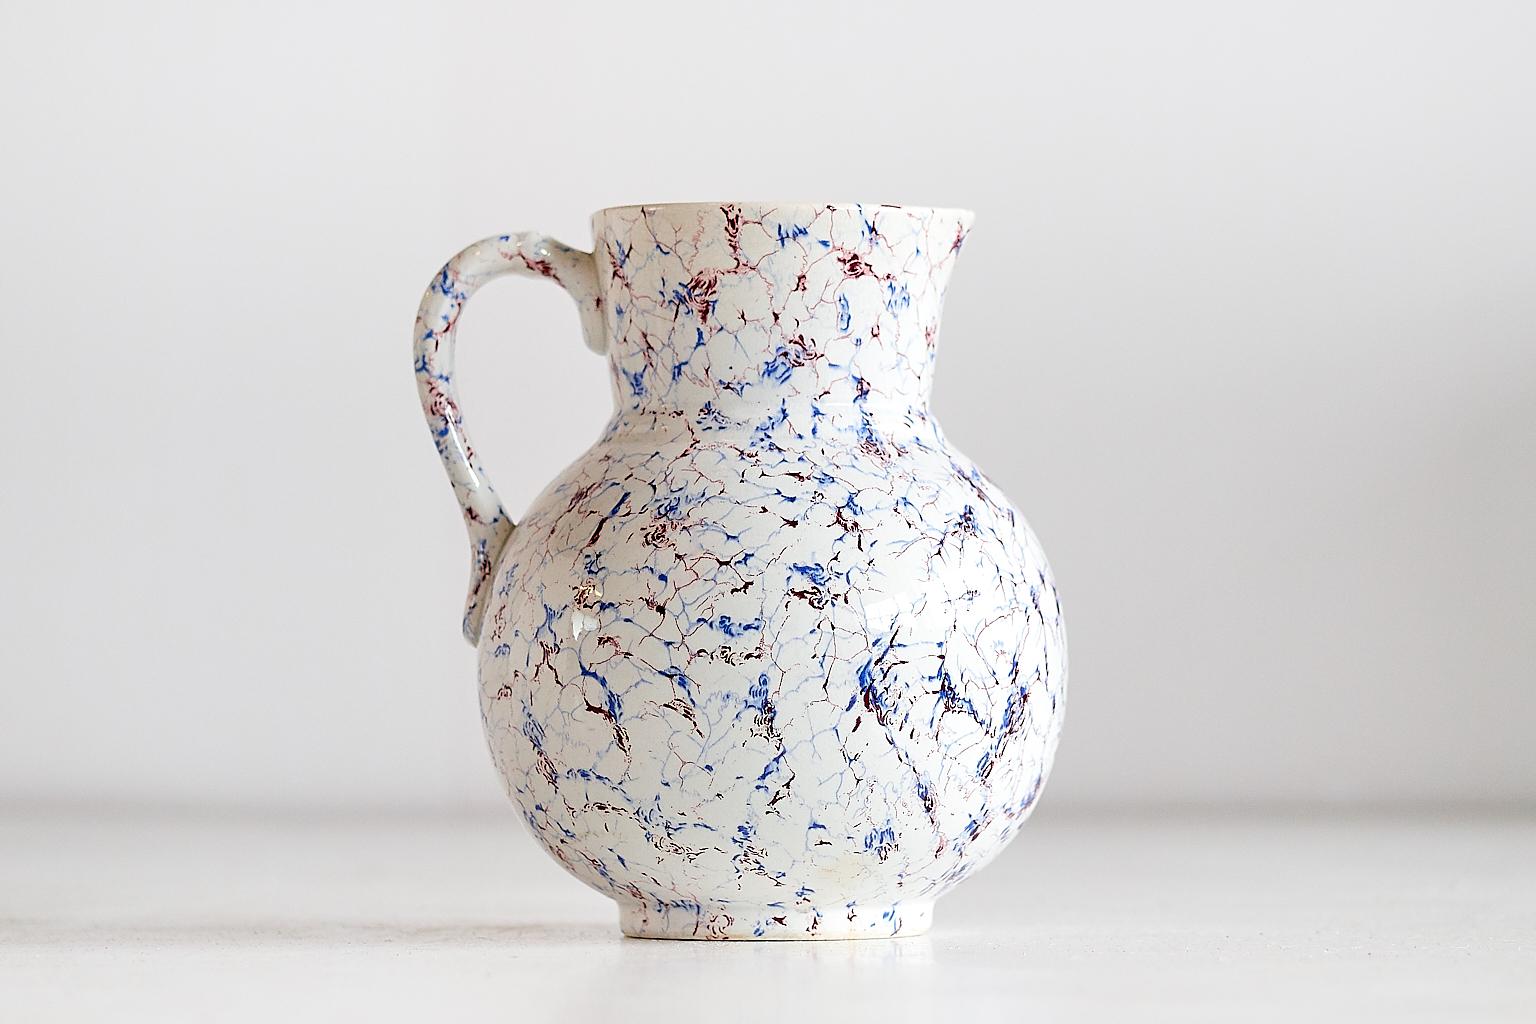 This glazed ceramic jug was produced by the Belgian faience manufacturer Boch Frères Keramis in the late 19th century. The abstract painted pattern in blue and red was inspired by the Fine pottery pieces produced in Japan. The slightly blurred